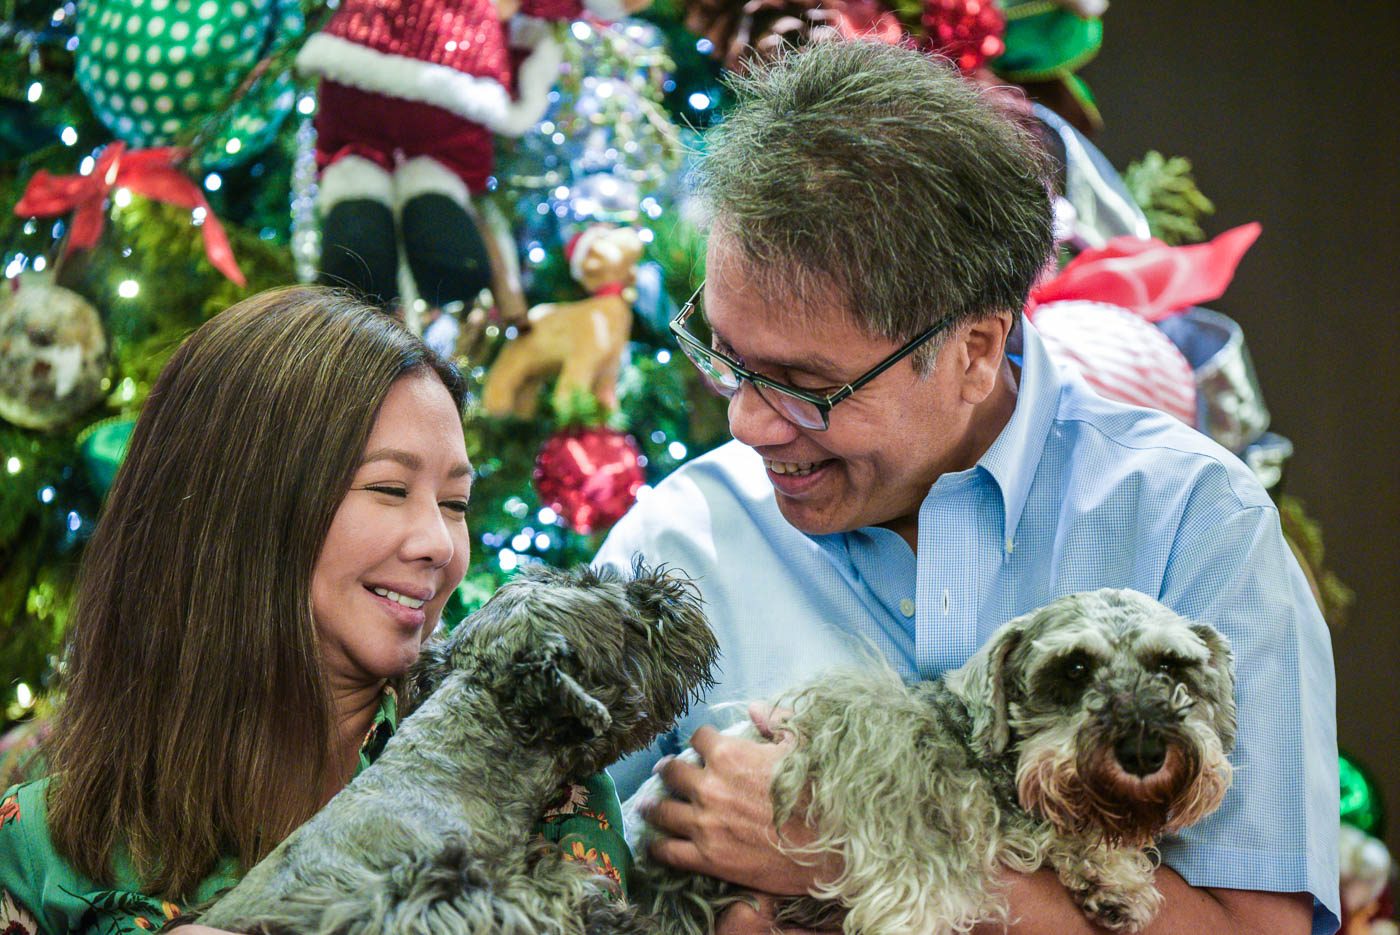 Christmas for Mar Roxas and Korina Sanchez: The basics with a touch of extra